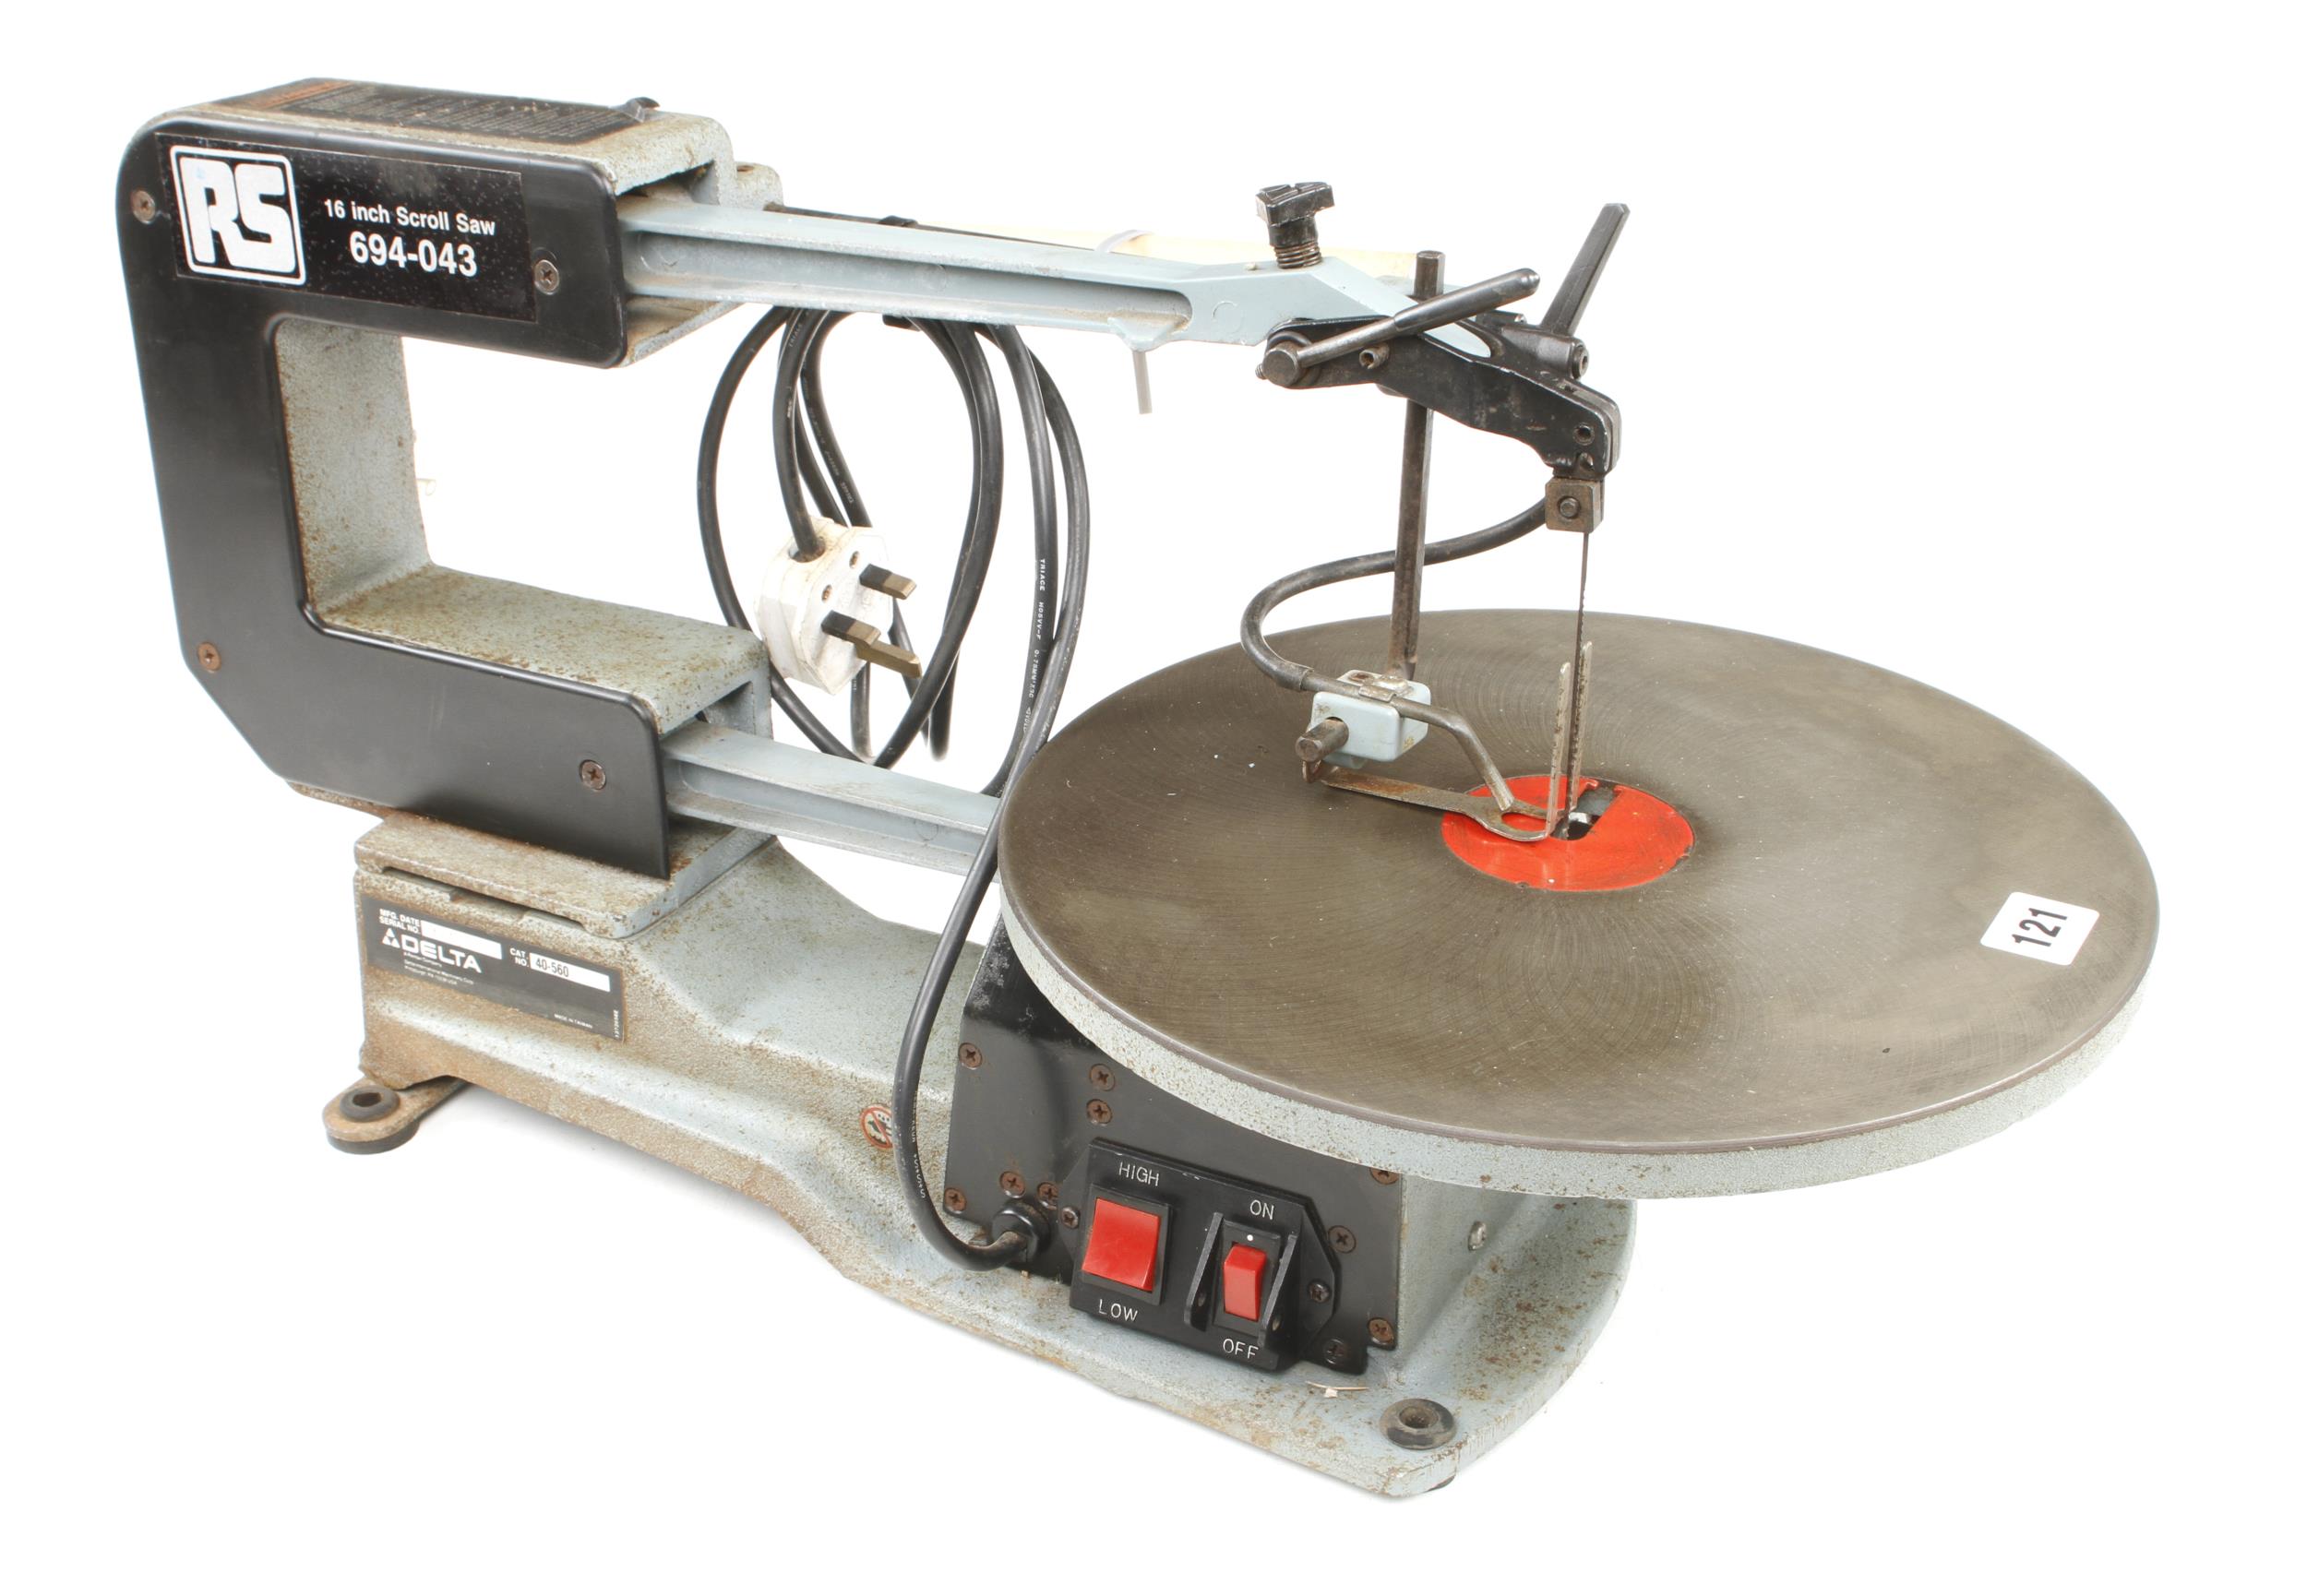 A DELTA 16" dual speed scroll saw 240v Pat tested